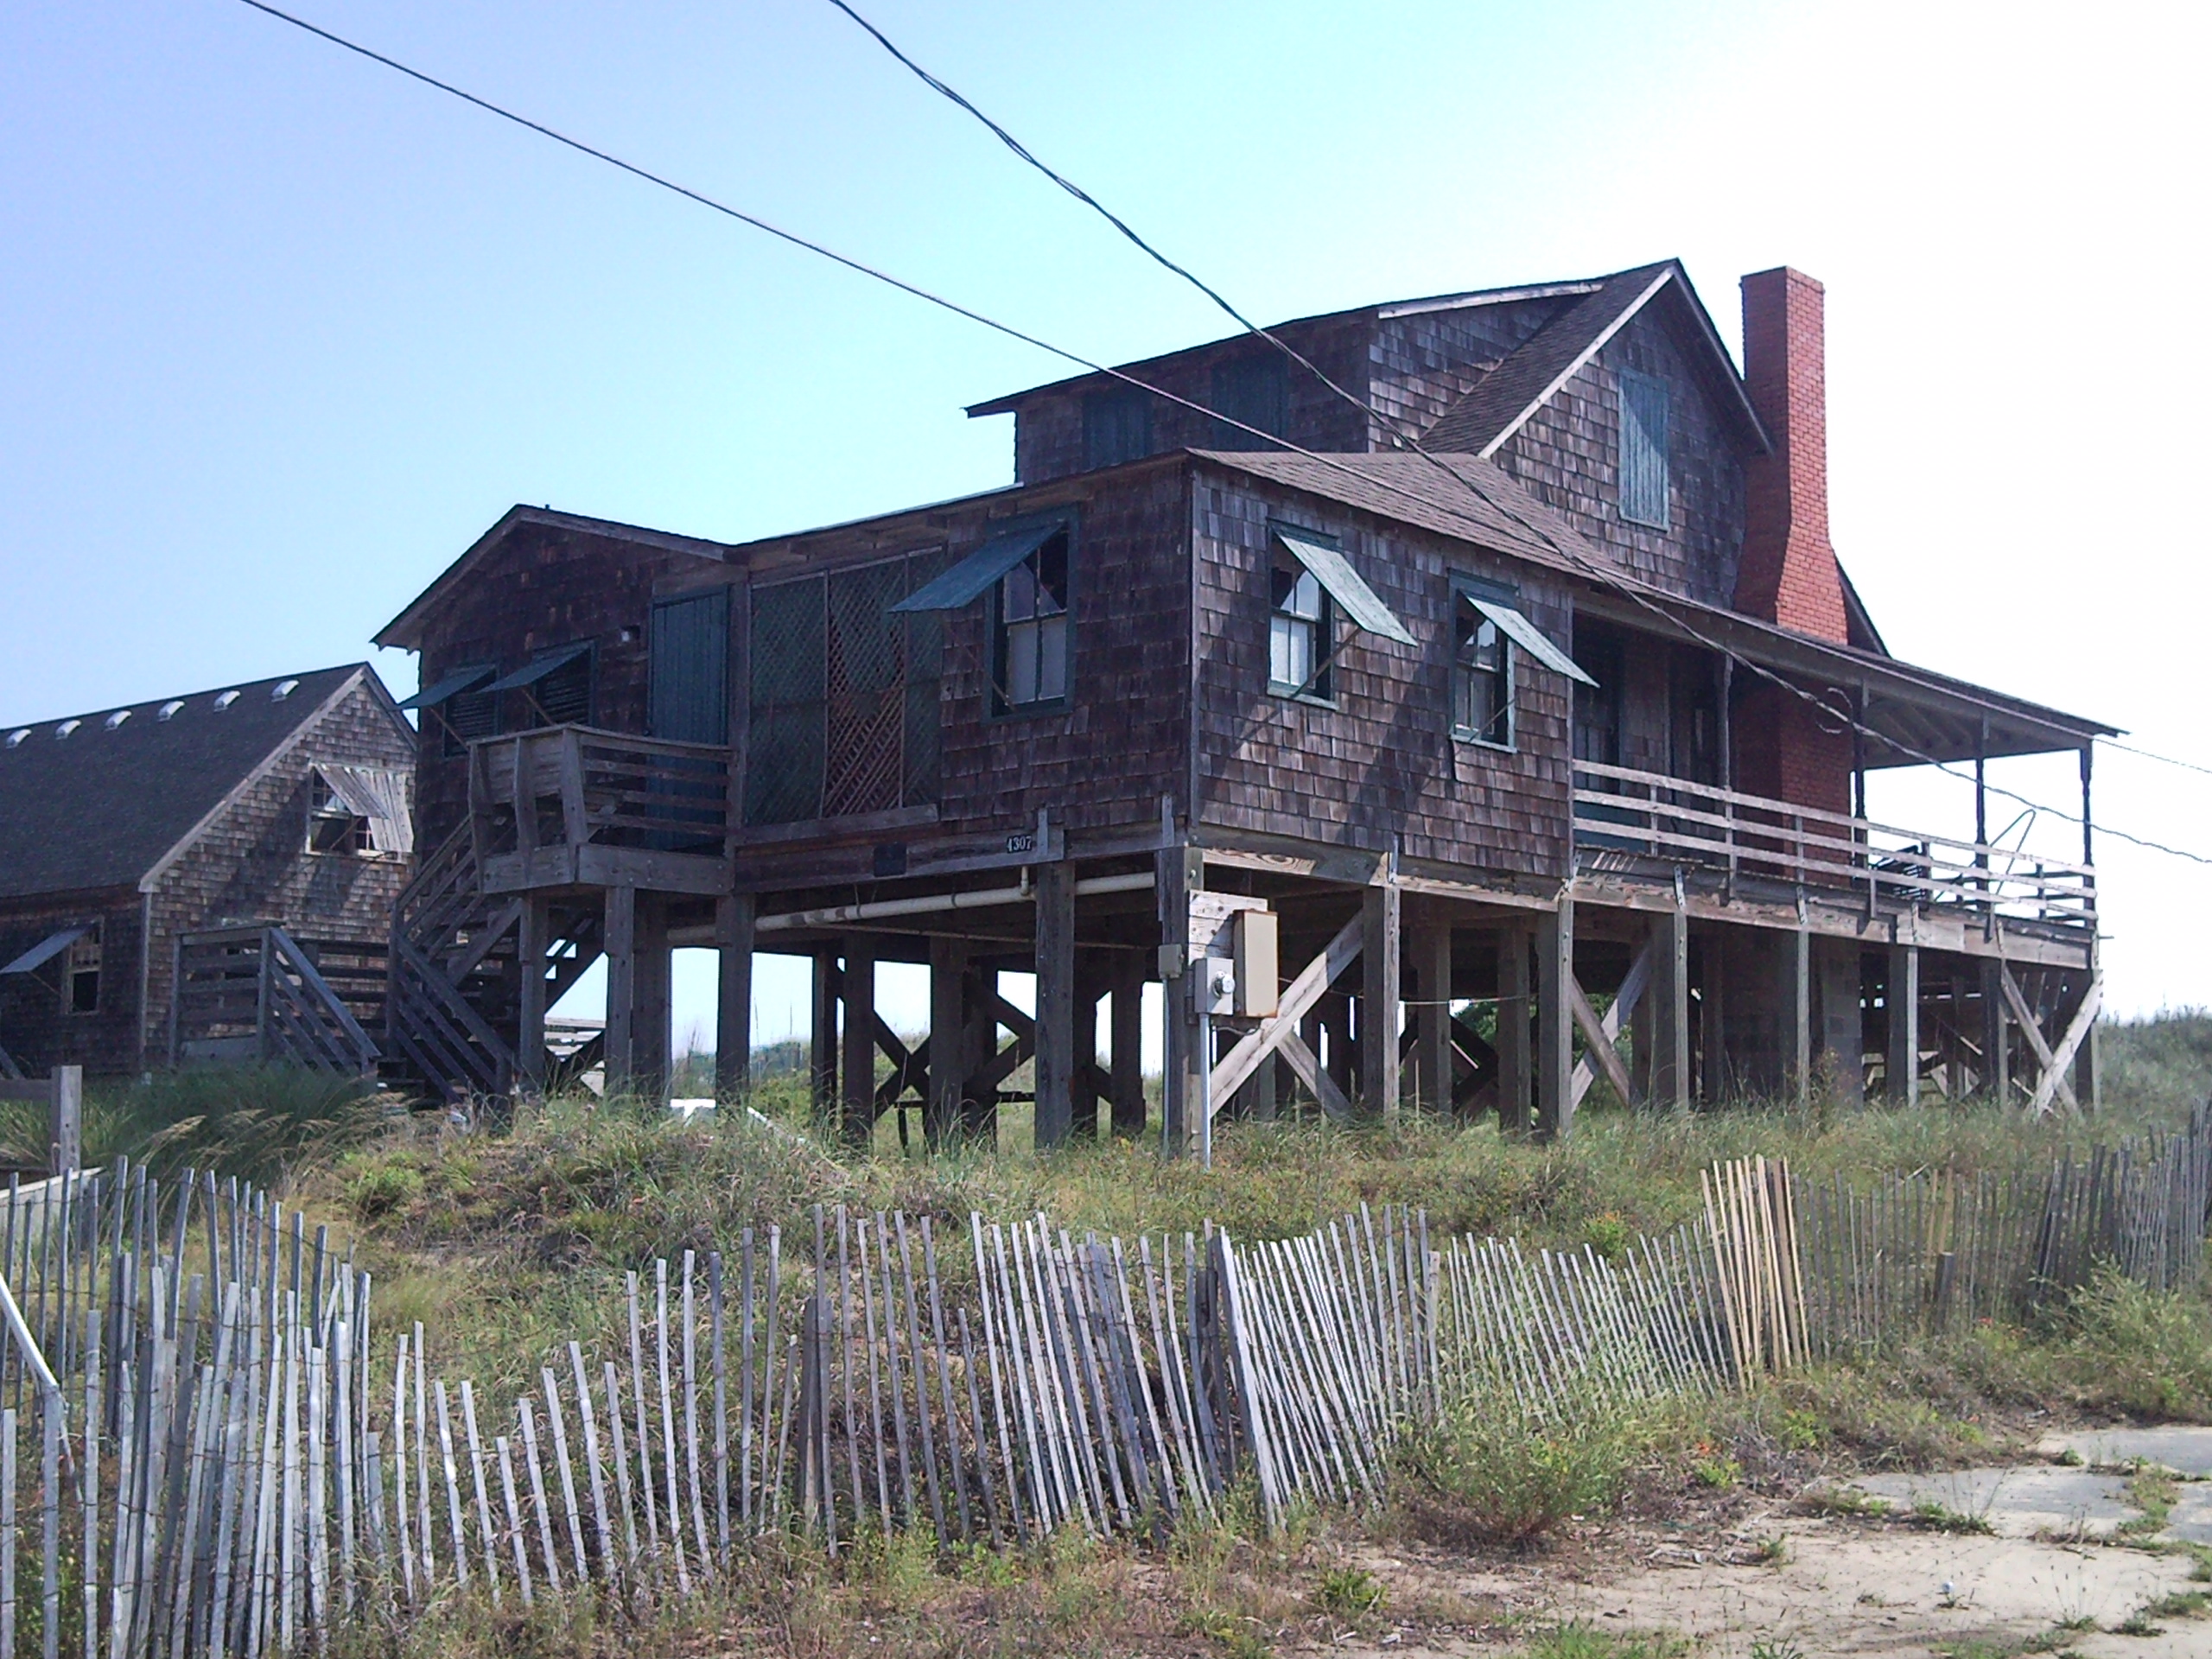 The Cottages Of The Outer Banks Covington International Travel